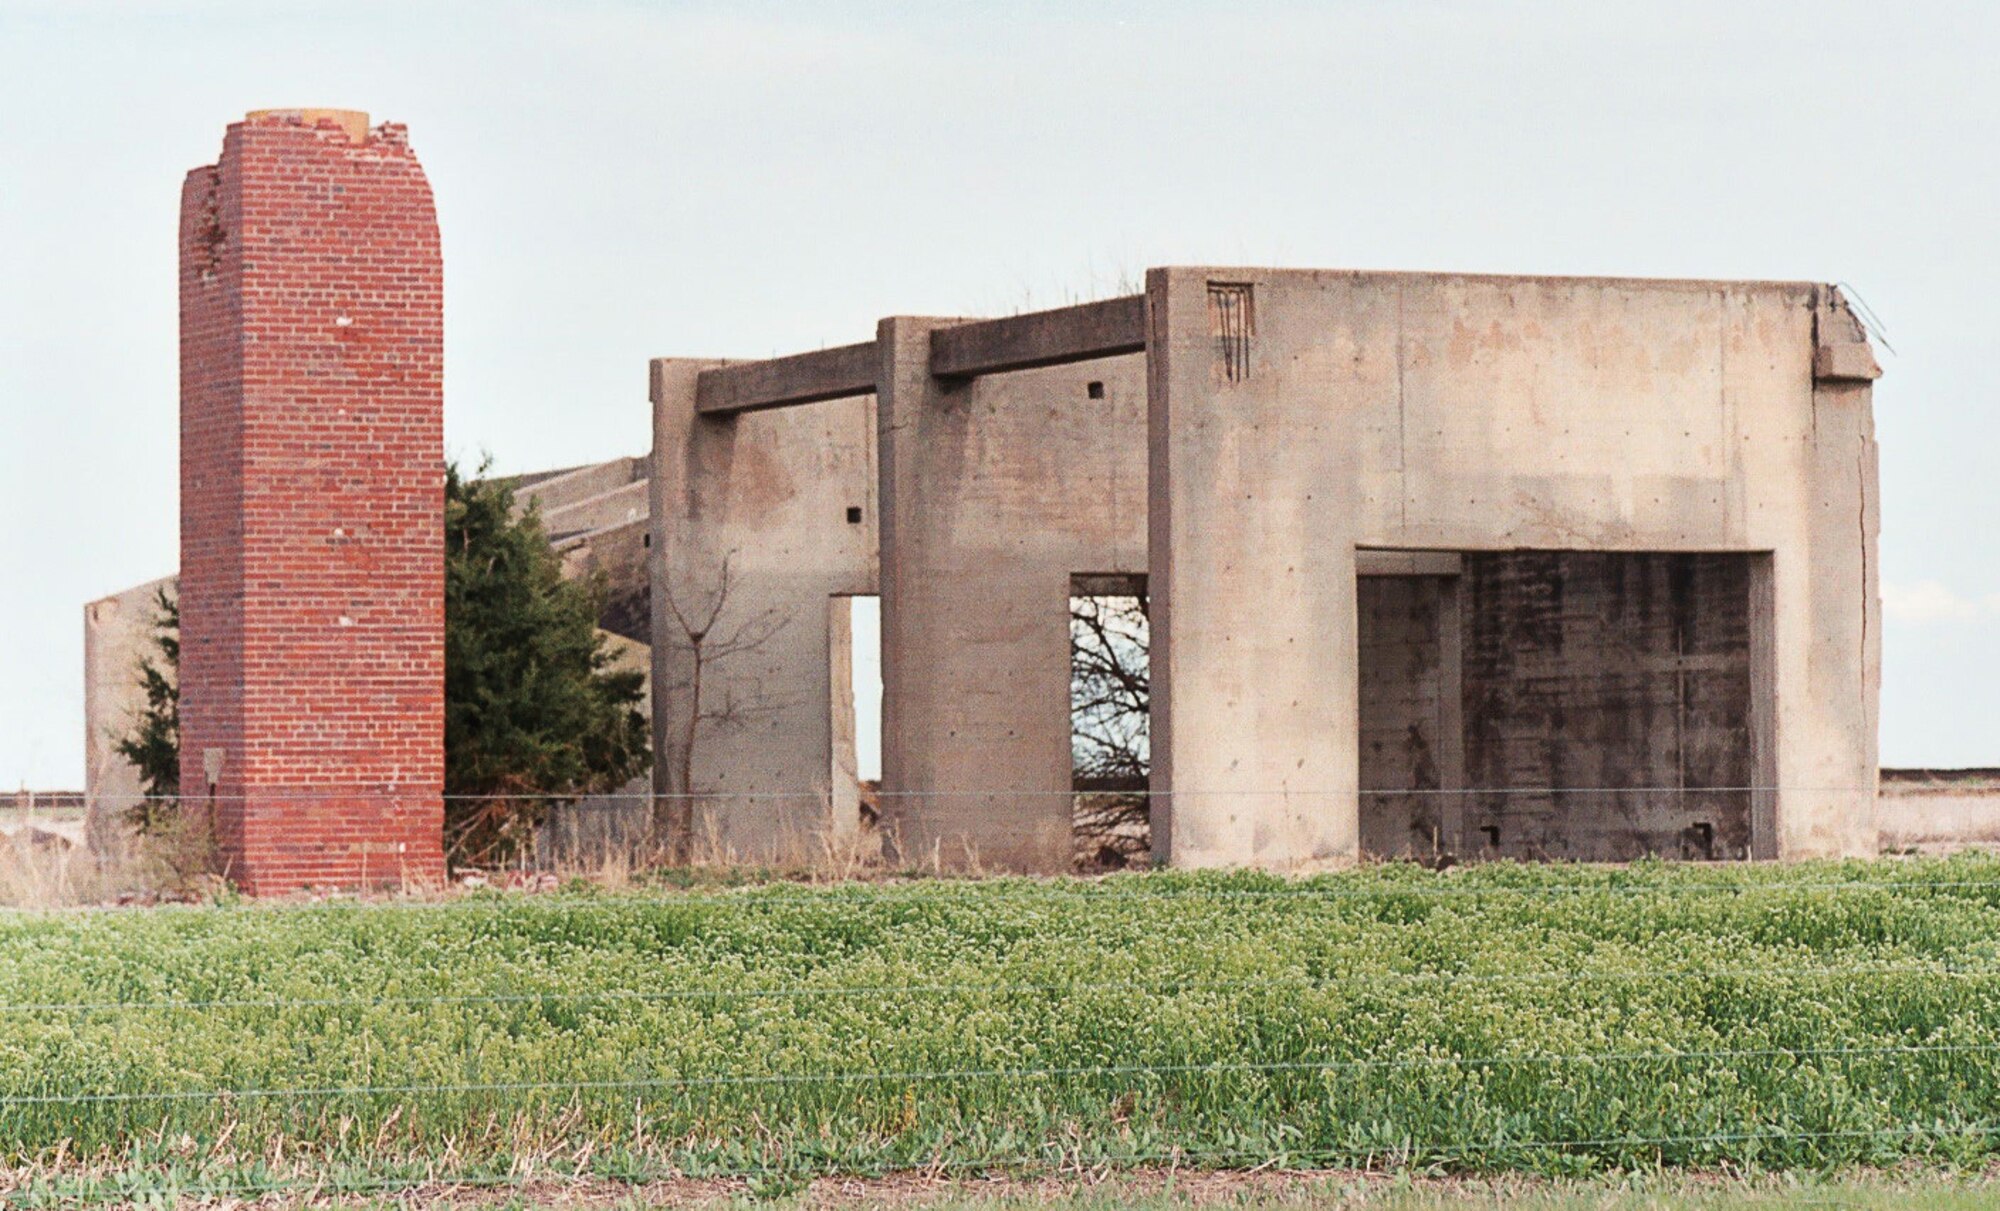 The remains of a heating plant stand on the former location of Bruning Army Air Field, Neb., in this photo taken on July 17, 2004.  The 507th Fighter Group, the precursor to the modern-day 507th Air Refueling Wing, was activated at Bruning AAF in 1944.  (U.S. Air Force photo by Lt. Col. [ret.] Donald Klinko)